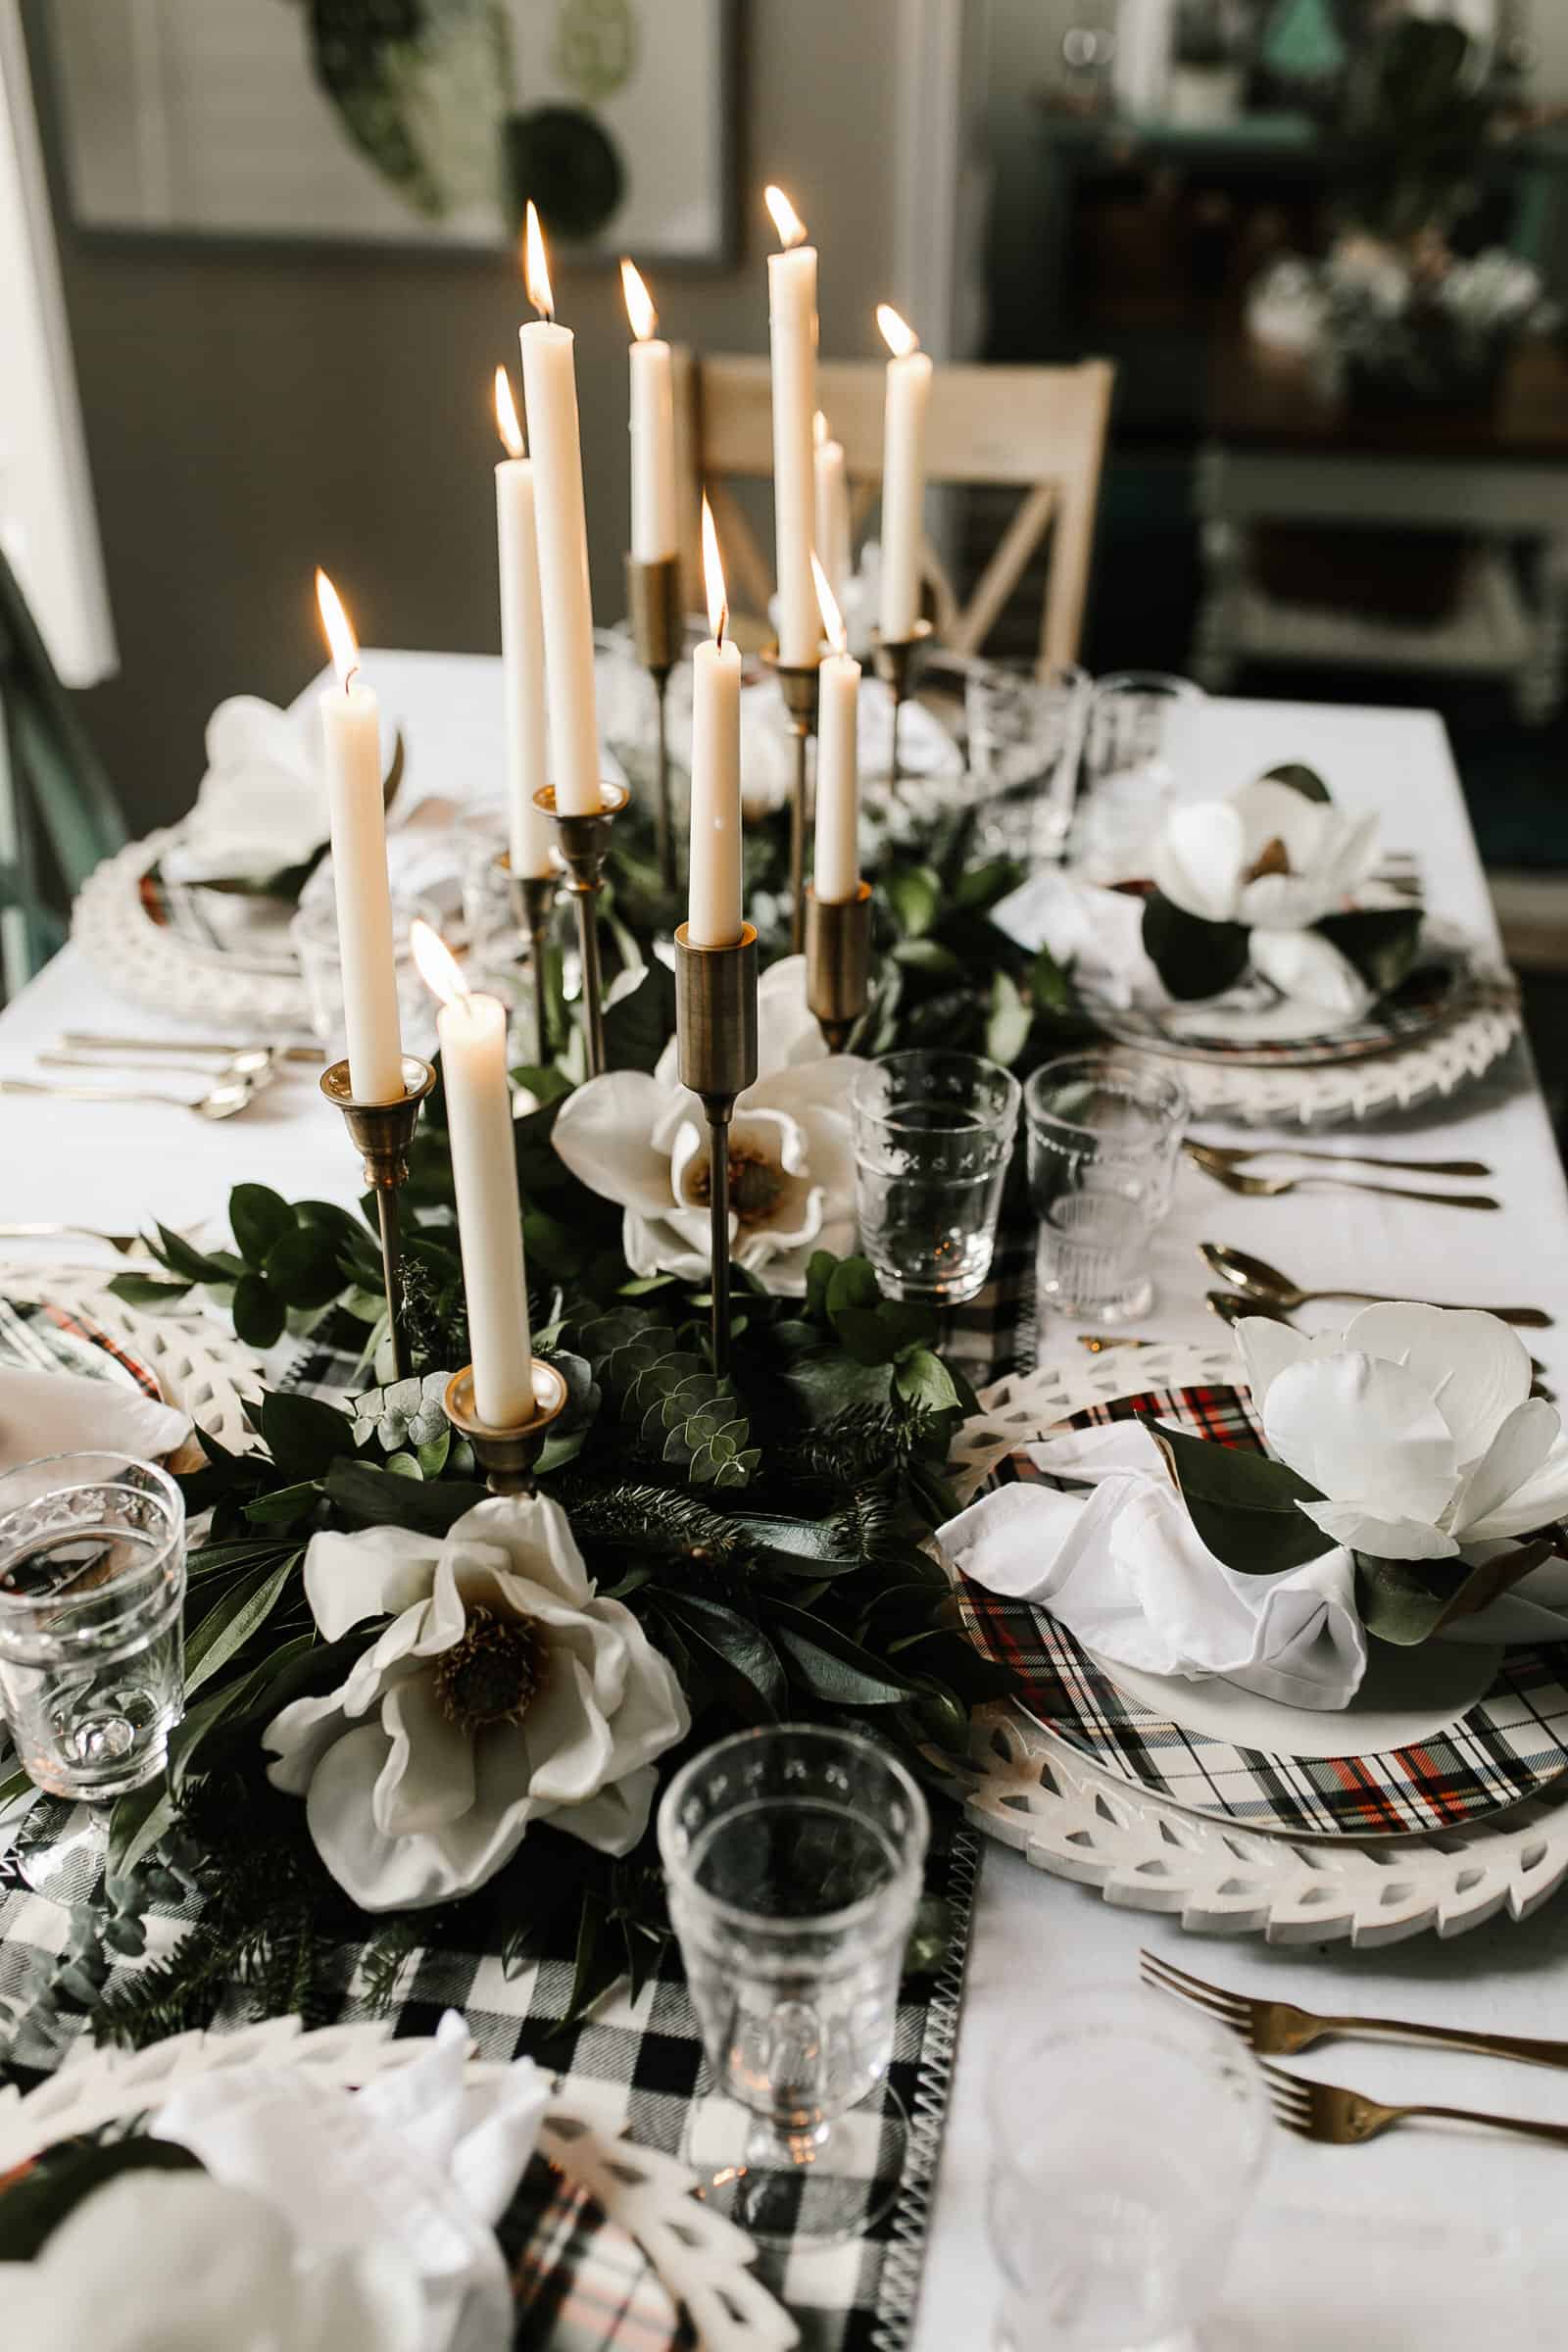 Traditional Christmas Centerpieces